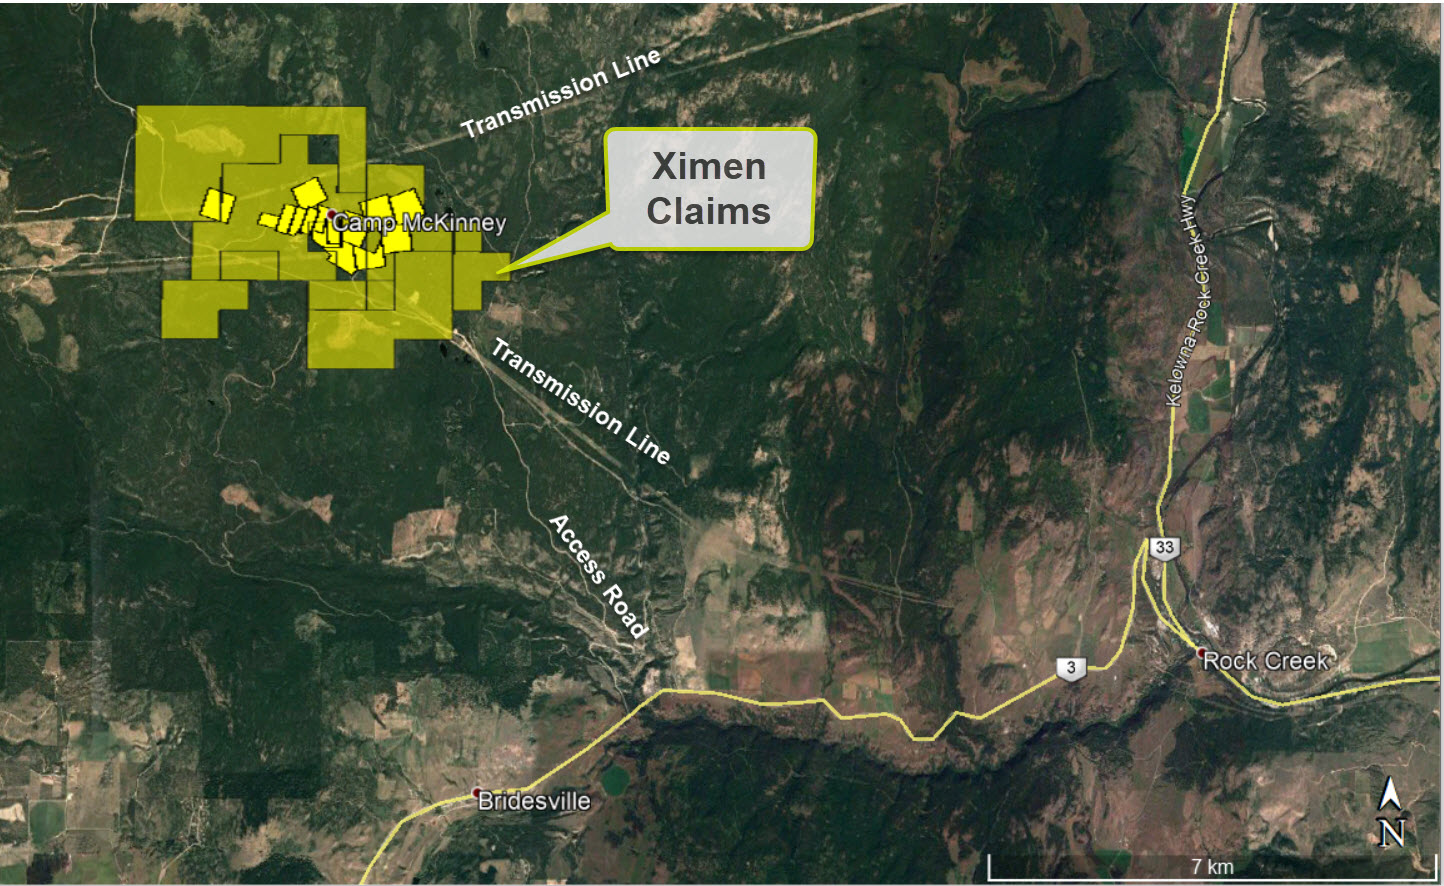 Ximen Mining Corp., Monday, July 15, 2019, Press release picture